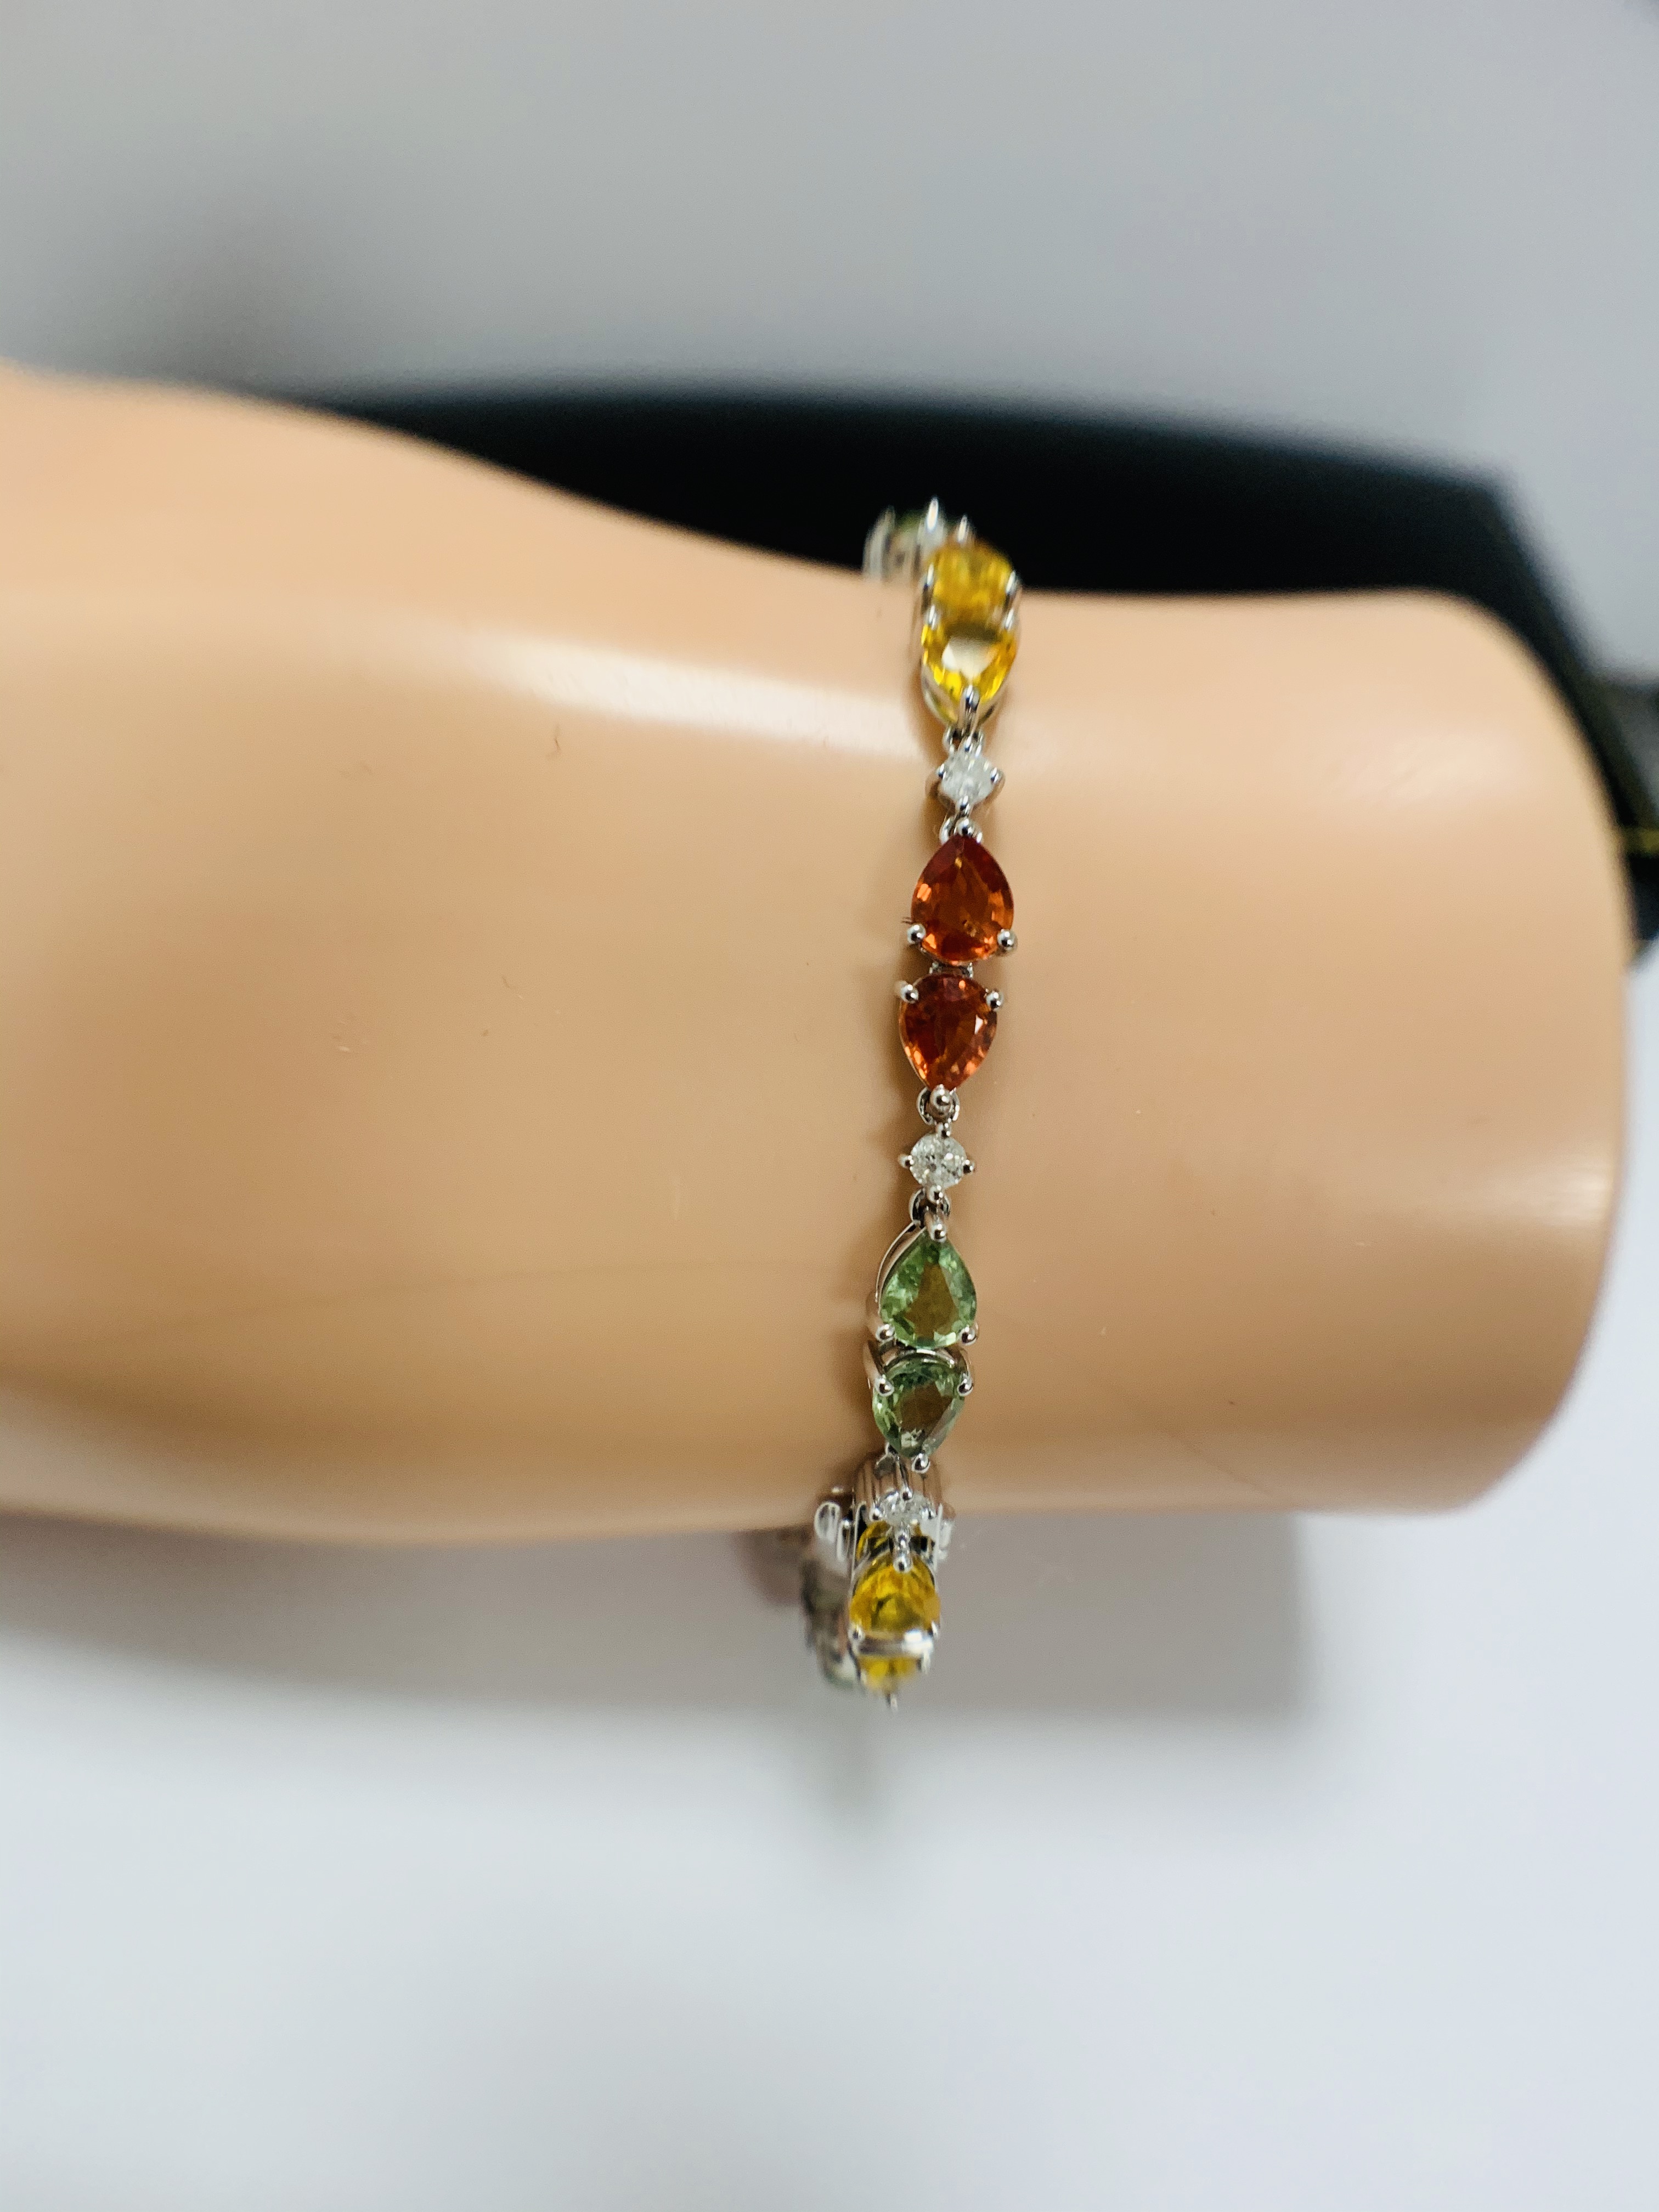 14ct White Gold Sapphire and Diamond bracelet featuring, 22 pear cut, yellow, green and orange Sapph - Image 21 of 24